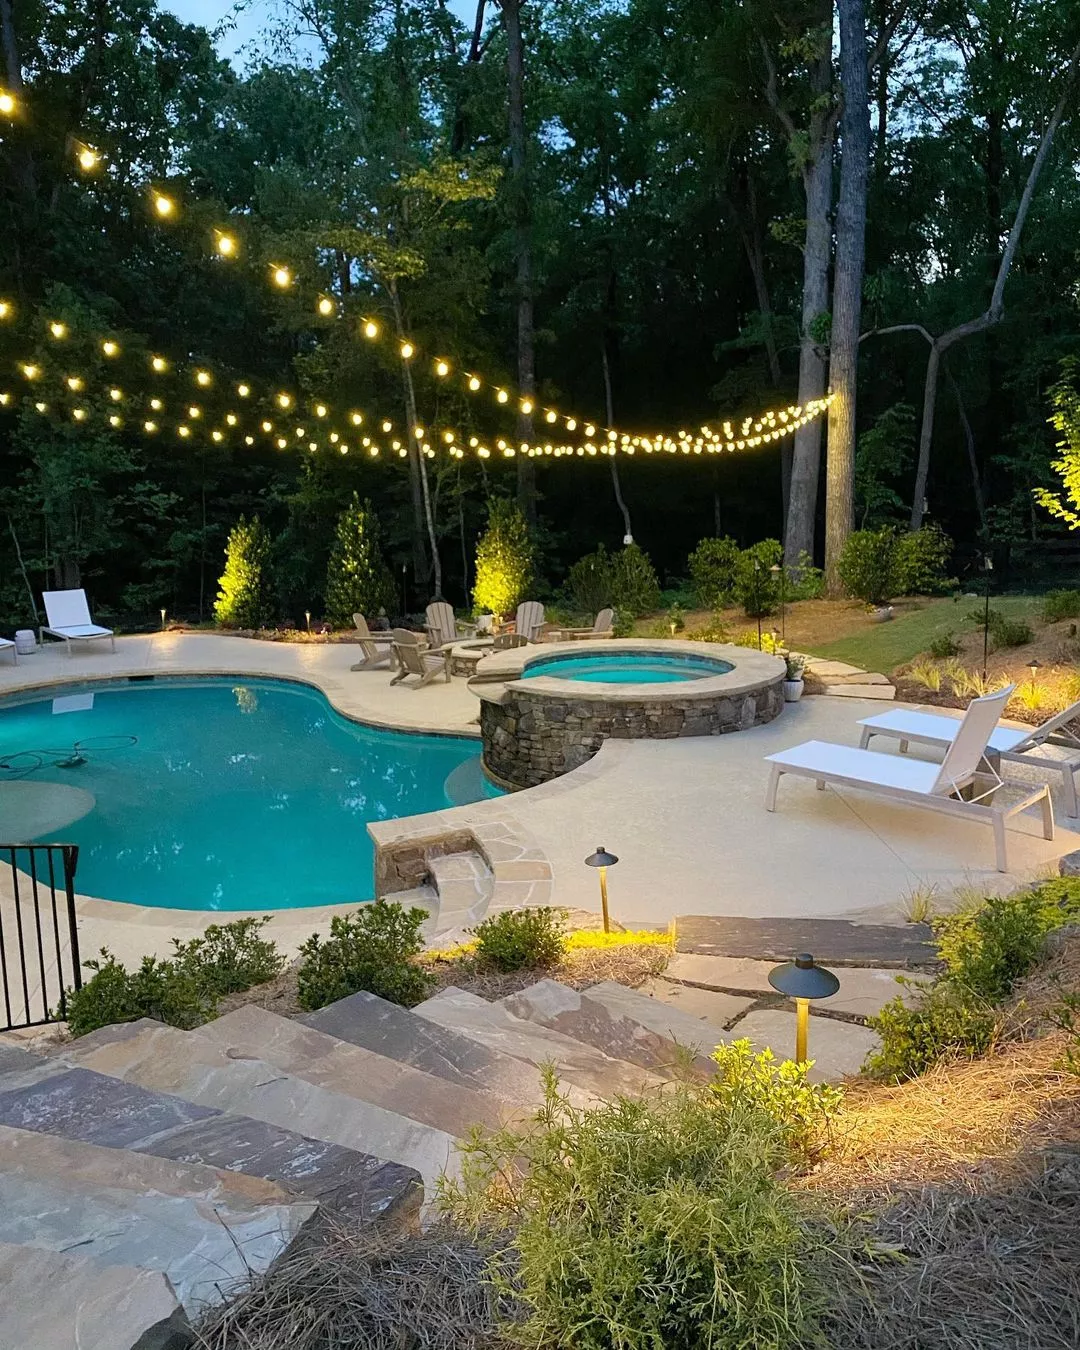 Pool Lighting Ideas That'll Jazz Up Your Next Backyard Get-Together